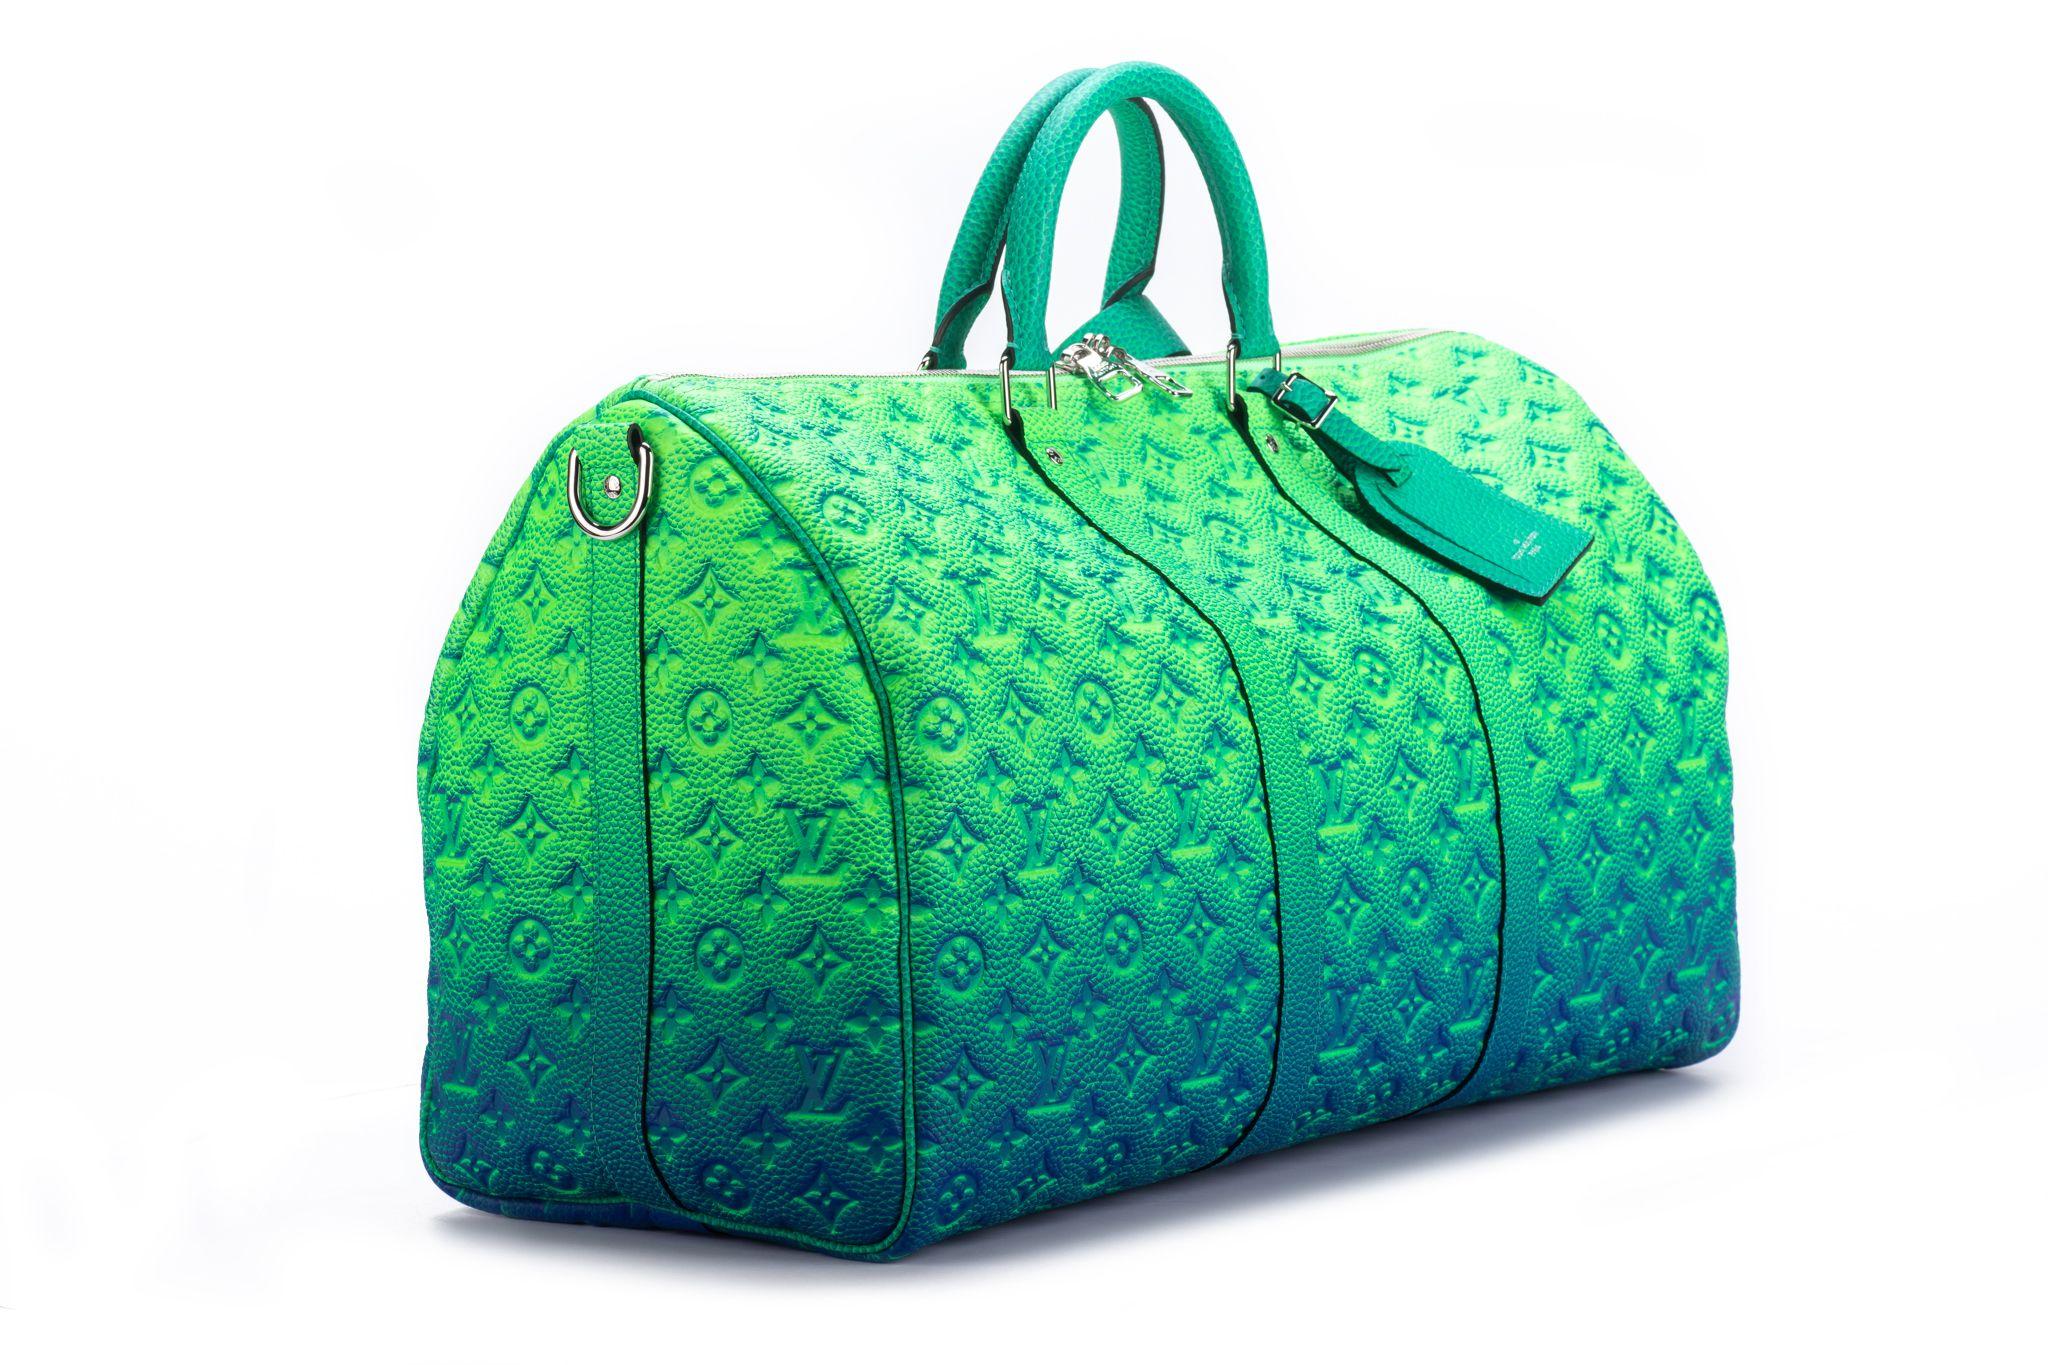 The Louis Vuitton Keepall 50 Bandouliere is made from bull calfskin with a soft multicolored green. This bag is from the Virgil Abloh Illusion leather collection. Soft side and cabin-friendly, the Keepall 50 bag merits it’s name: the unexpectedly